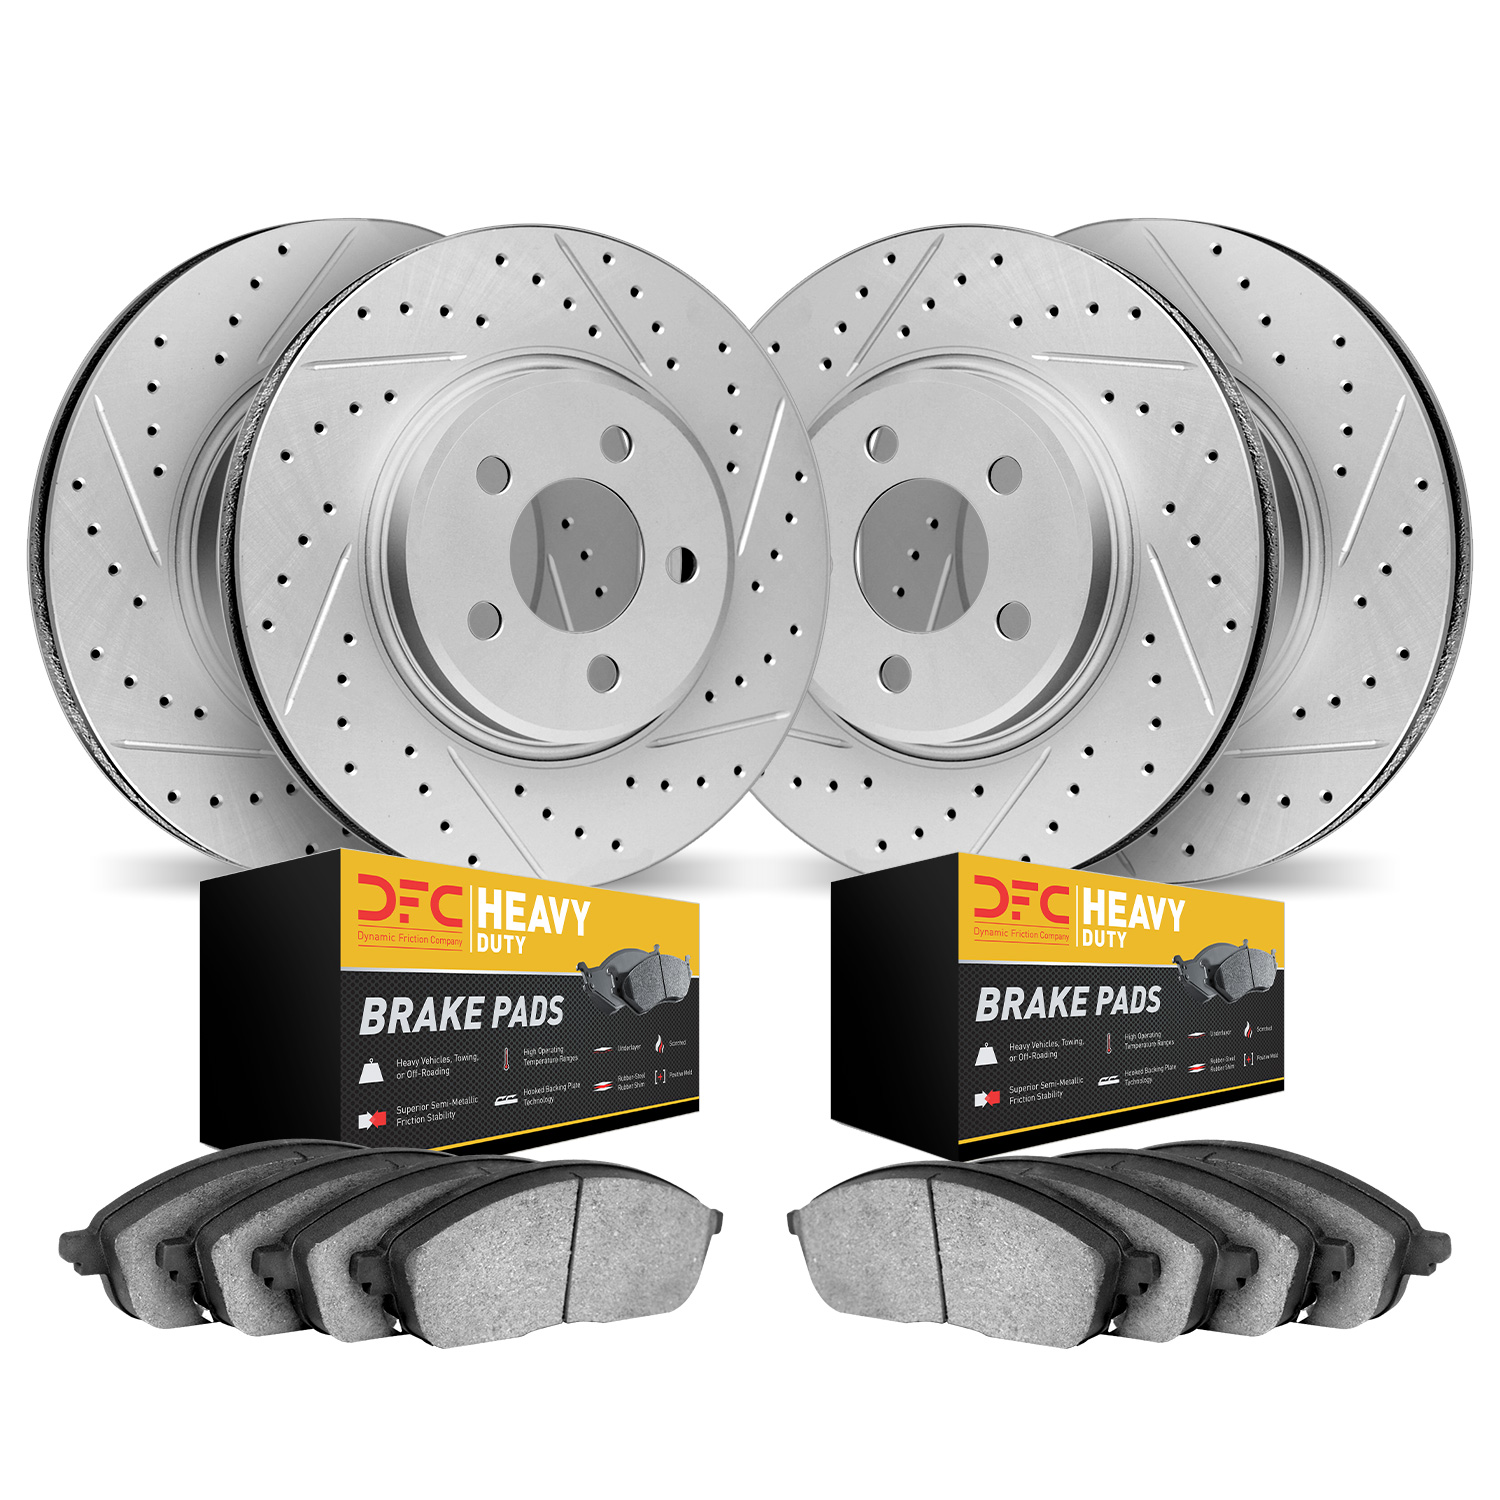 2204-39017 Geoperformance Drilled/Slotted Rotors w/Heavy-Duty Pads Kit, 2006-2014 Mopar, Position: Front and Rear